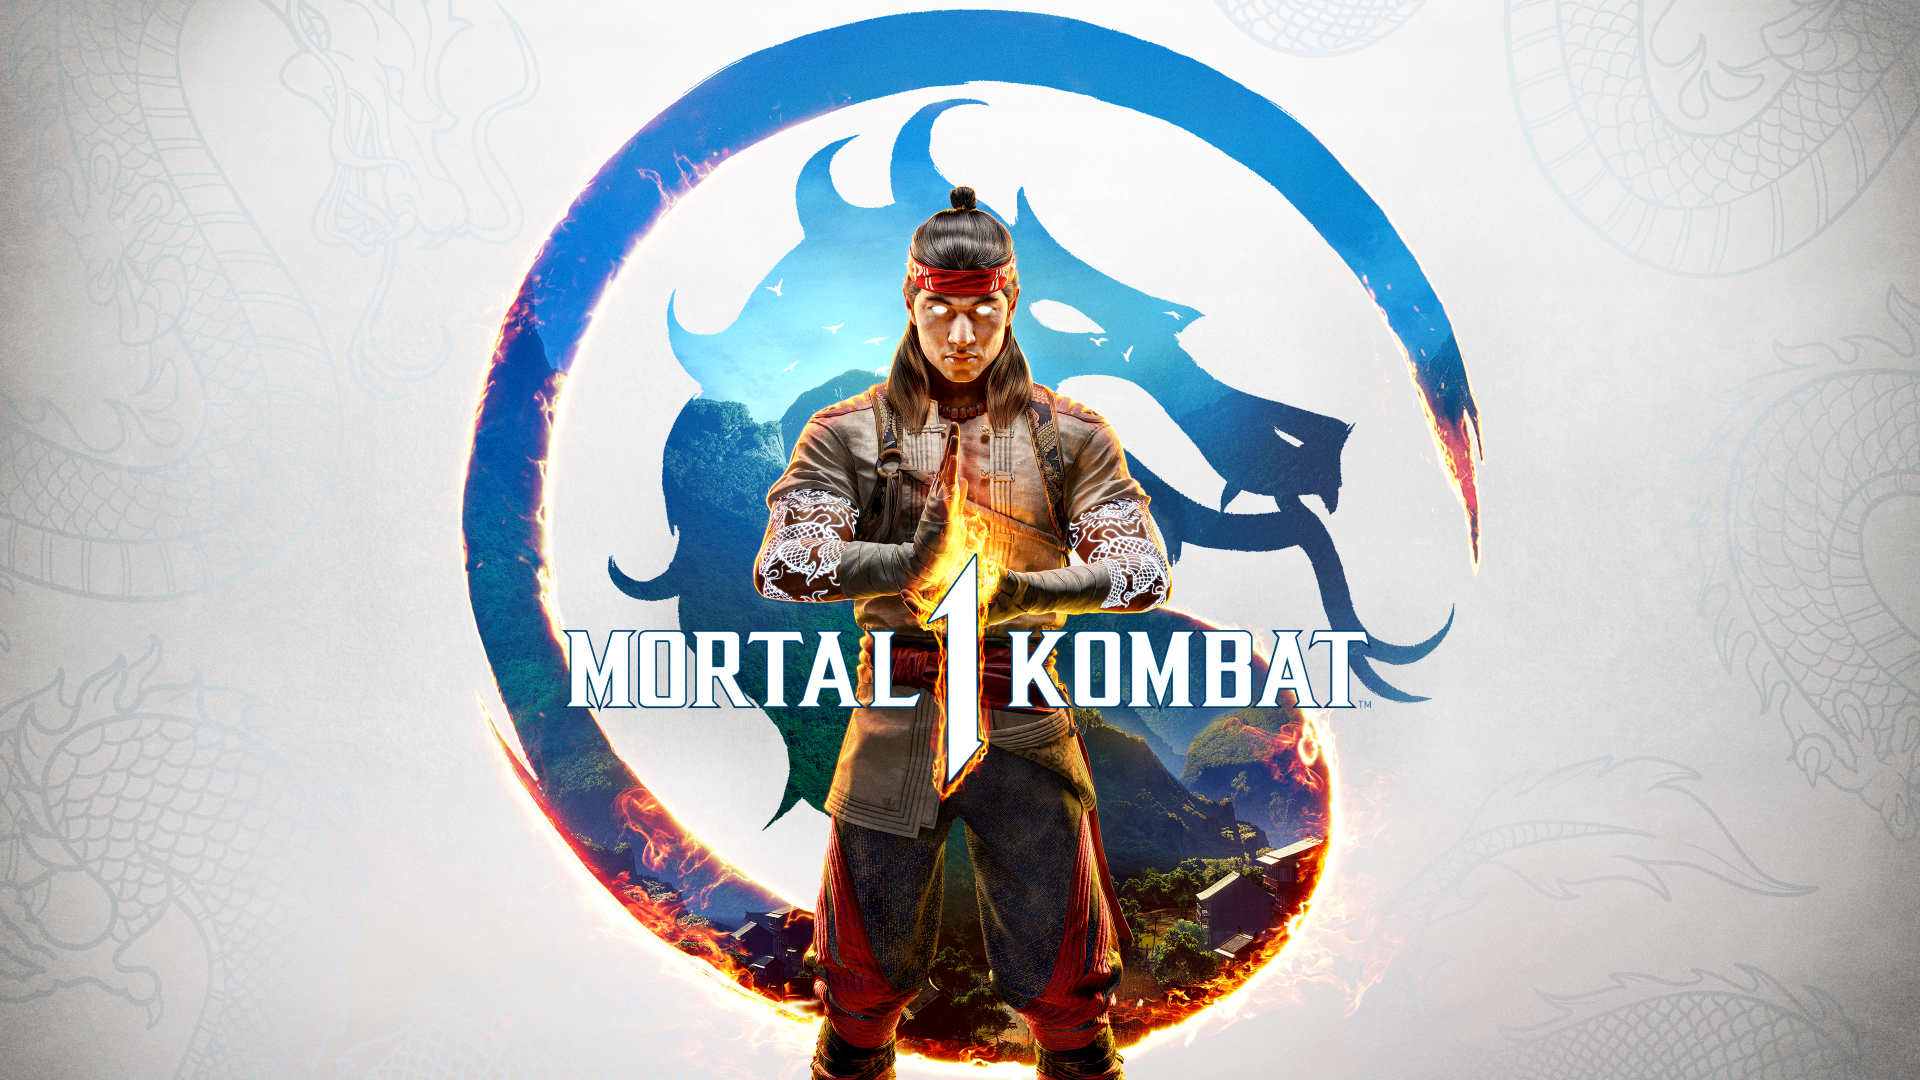 480 Mortal Kombat HD Wallpapers and Backgrounds